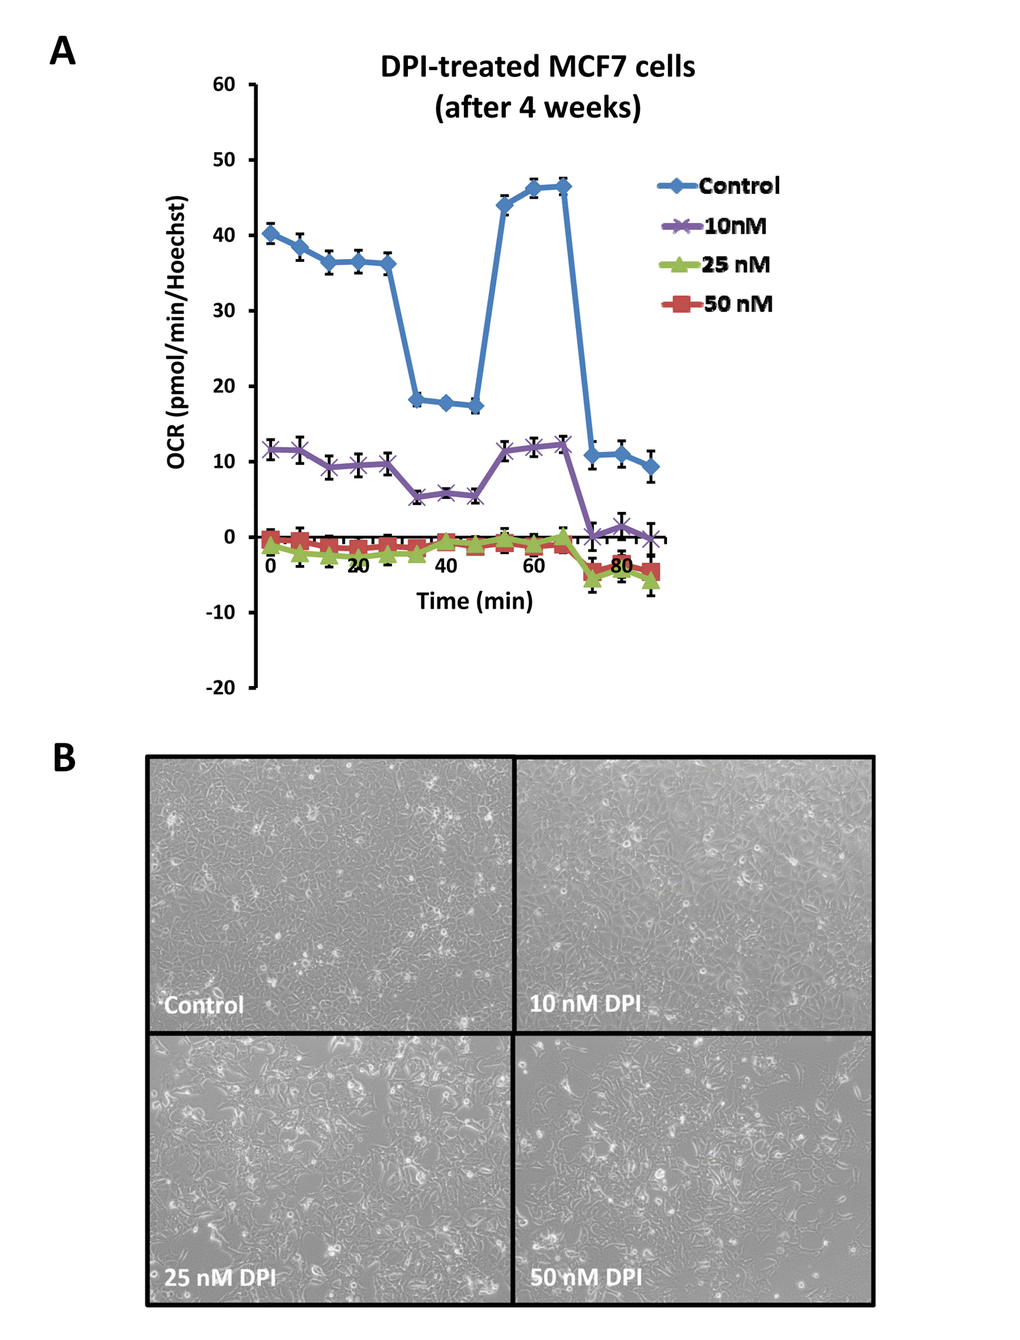 Long-term treatment with DPI is surprisingly “non-toxic”. To determine the long-term effects of DPI (10, 25 and 50 nM), MCF7 cells were cultured for an entire month, in the presence of the drug. Then, their mitochondrial respiration was assessed by metabolic flux analysis. Panel (A) shows that all three drug concentrations show near complete inhibition of mitochondrial respiration. Panel (B) illustrates the morphology of cells after 4 weeks of DPI treatment. Note that the morphology and density of the cells is relatively unchanged, especially at a DPI concentration of 10 nM. Media with DPI or vehicle alone was replaced every 2 to 3 days, during the period of 1 month. Cells undergoing long-term treatment with DPI were also successfully passaged, after harvesting by standard trypsinization techniques.